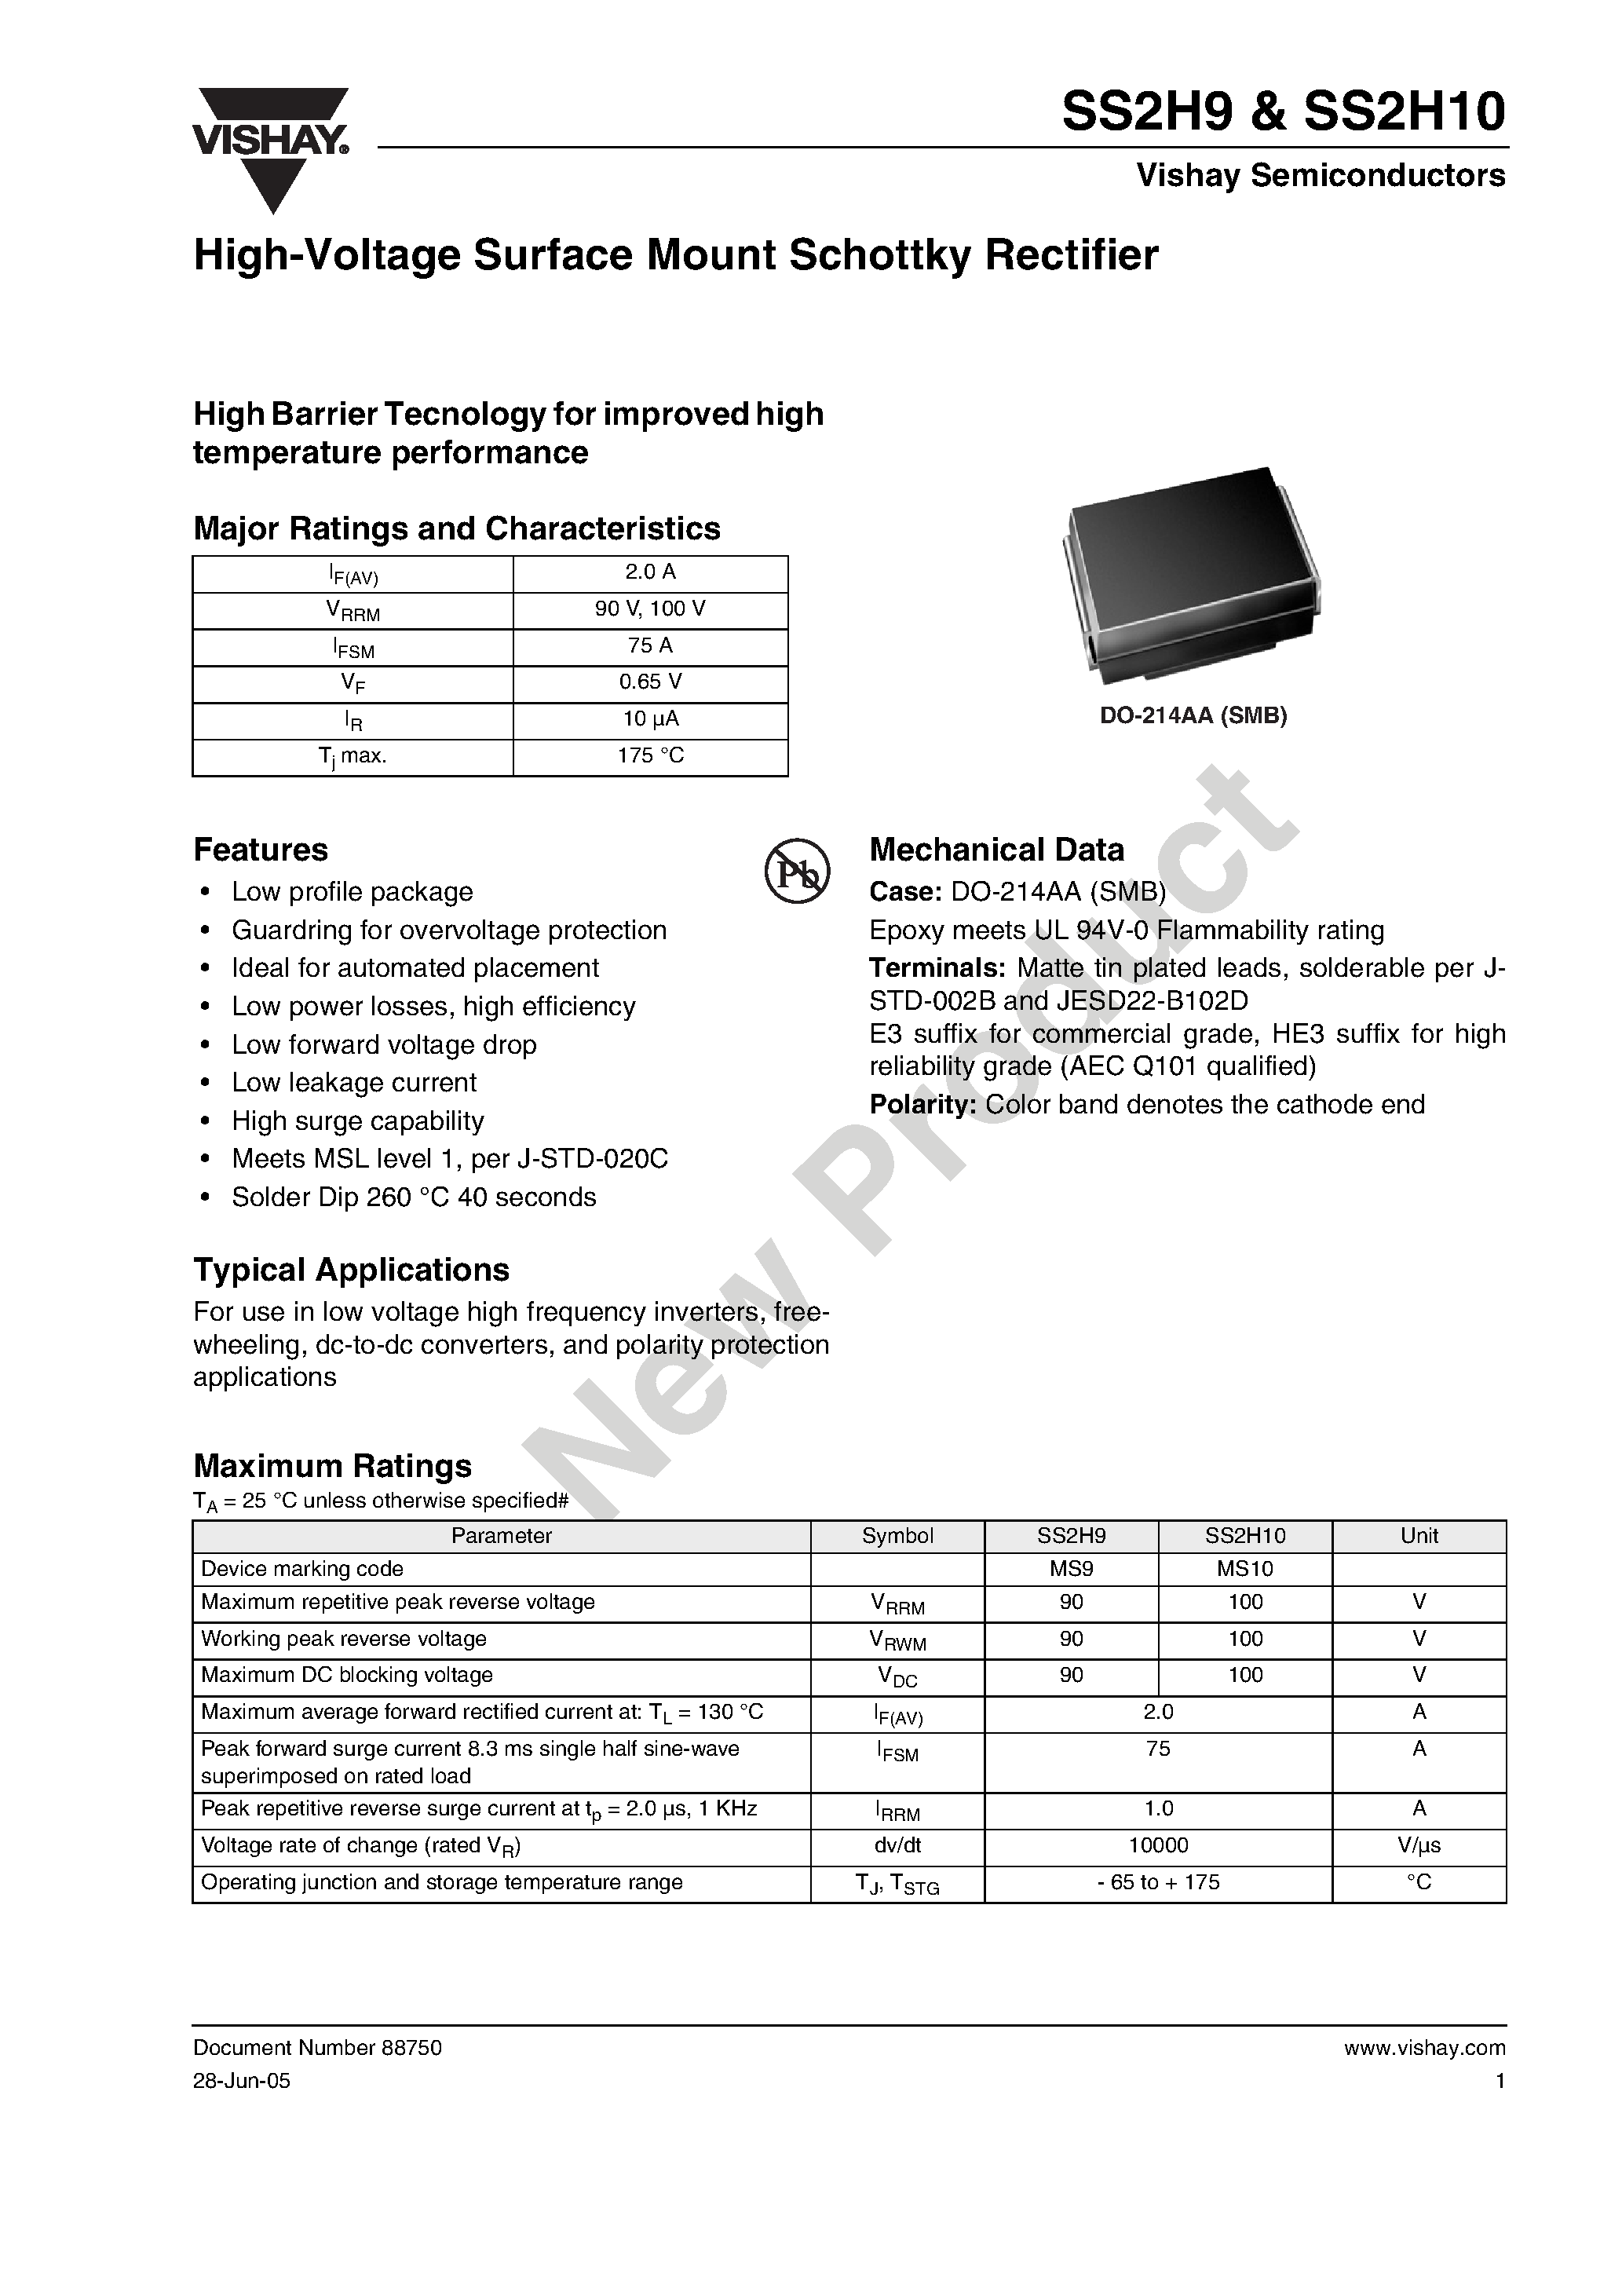 Datasheet SS2H10 - (SS2H9 / SS2H10) High-Voltage Surface Mount Schottky Rectifier page 1